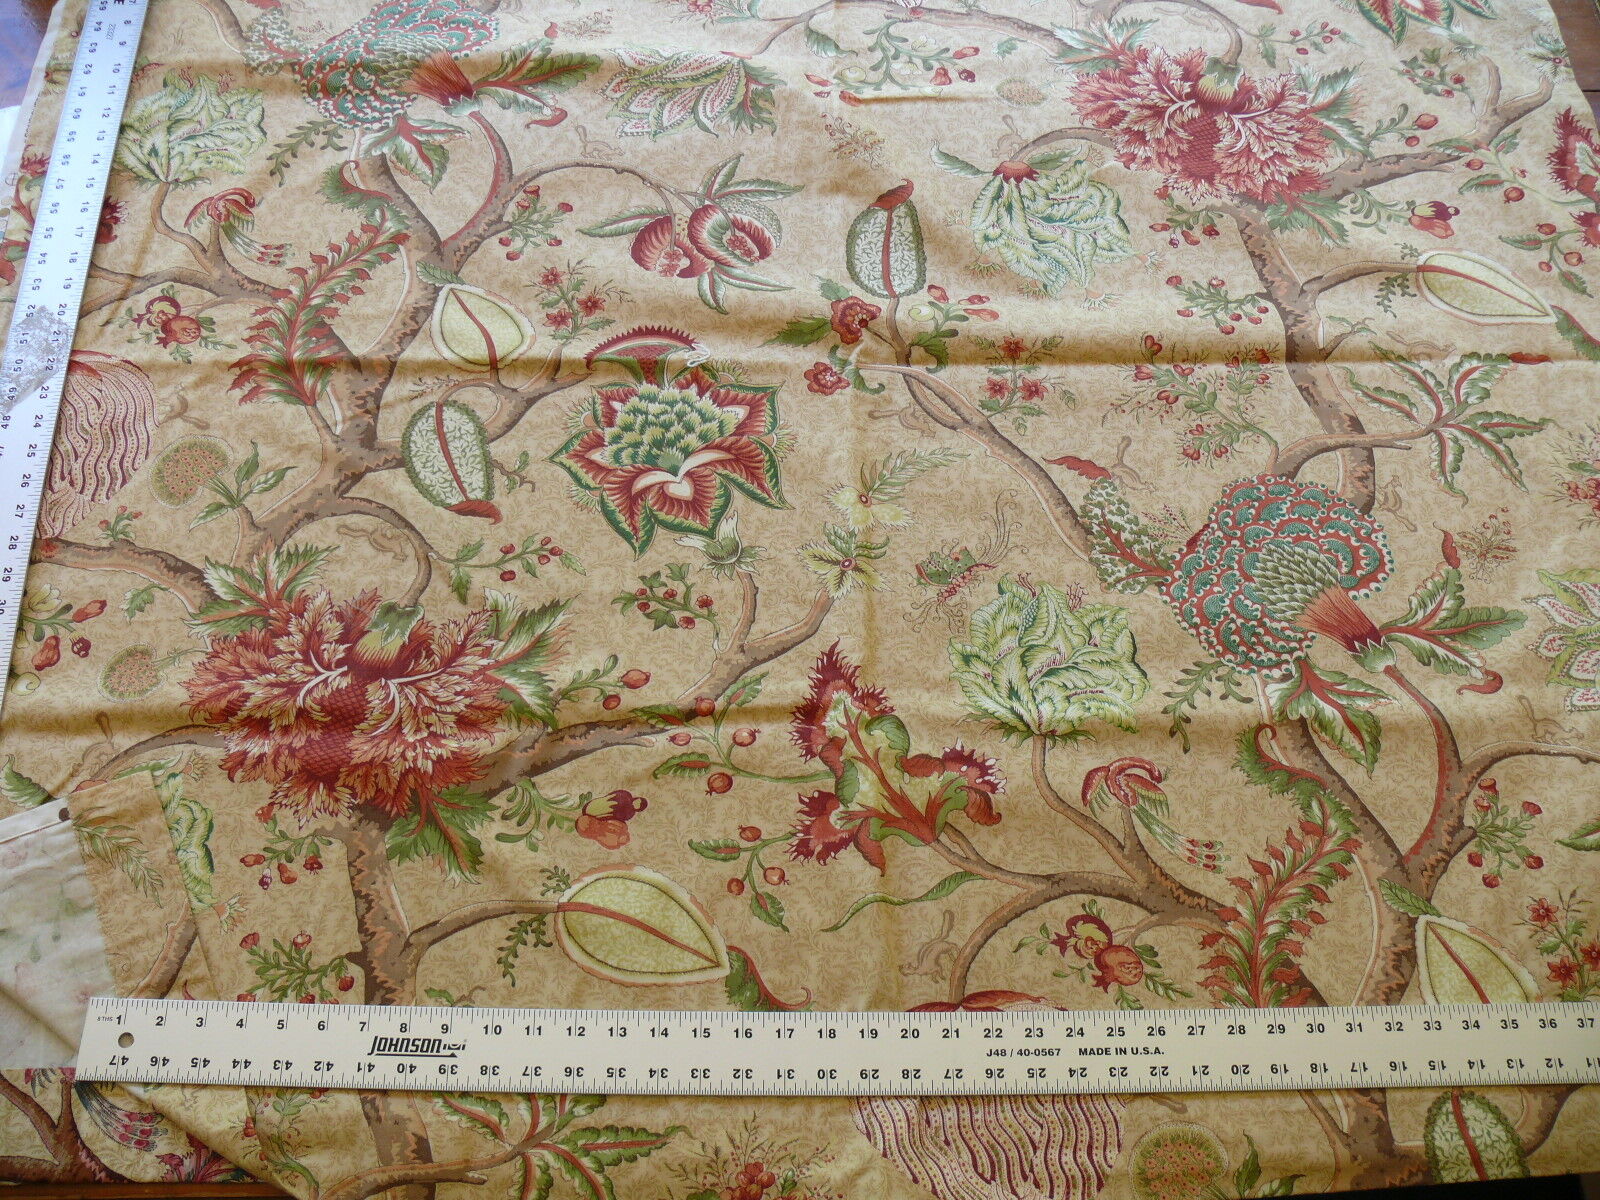  2.5Y SCALAMANDRE PONDICHERRY LARGE SQUARE HIGH END FABRIC MSRP$595 H20